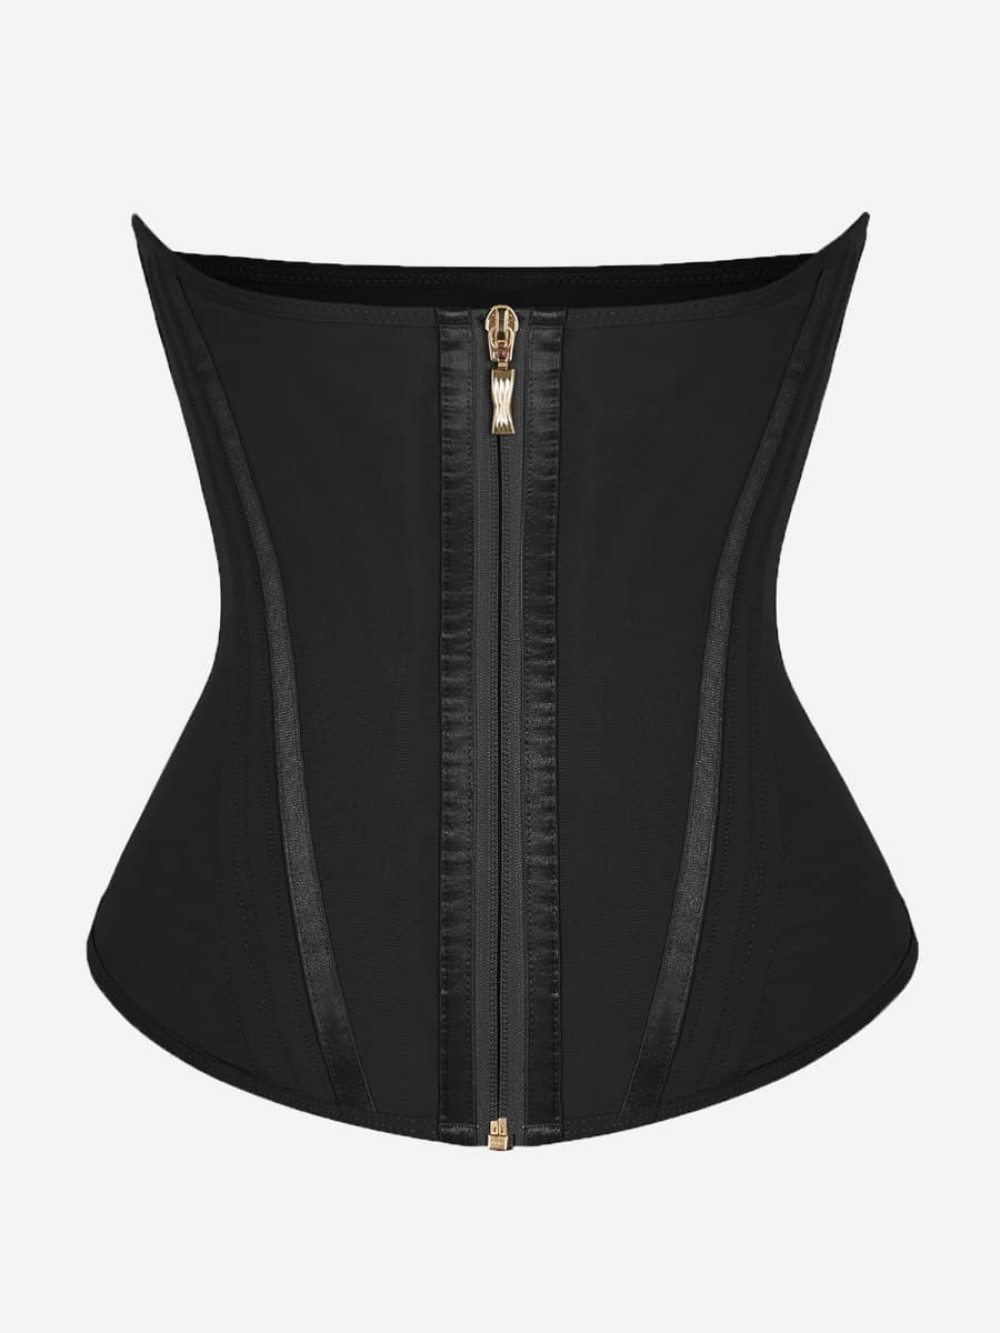 Fashion Hourglass Figure Shaping Waist Trainer with 15 Built-in Steel Bone